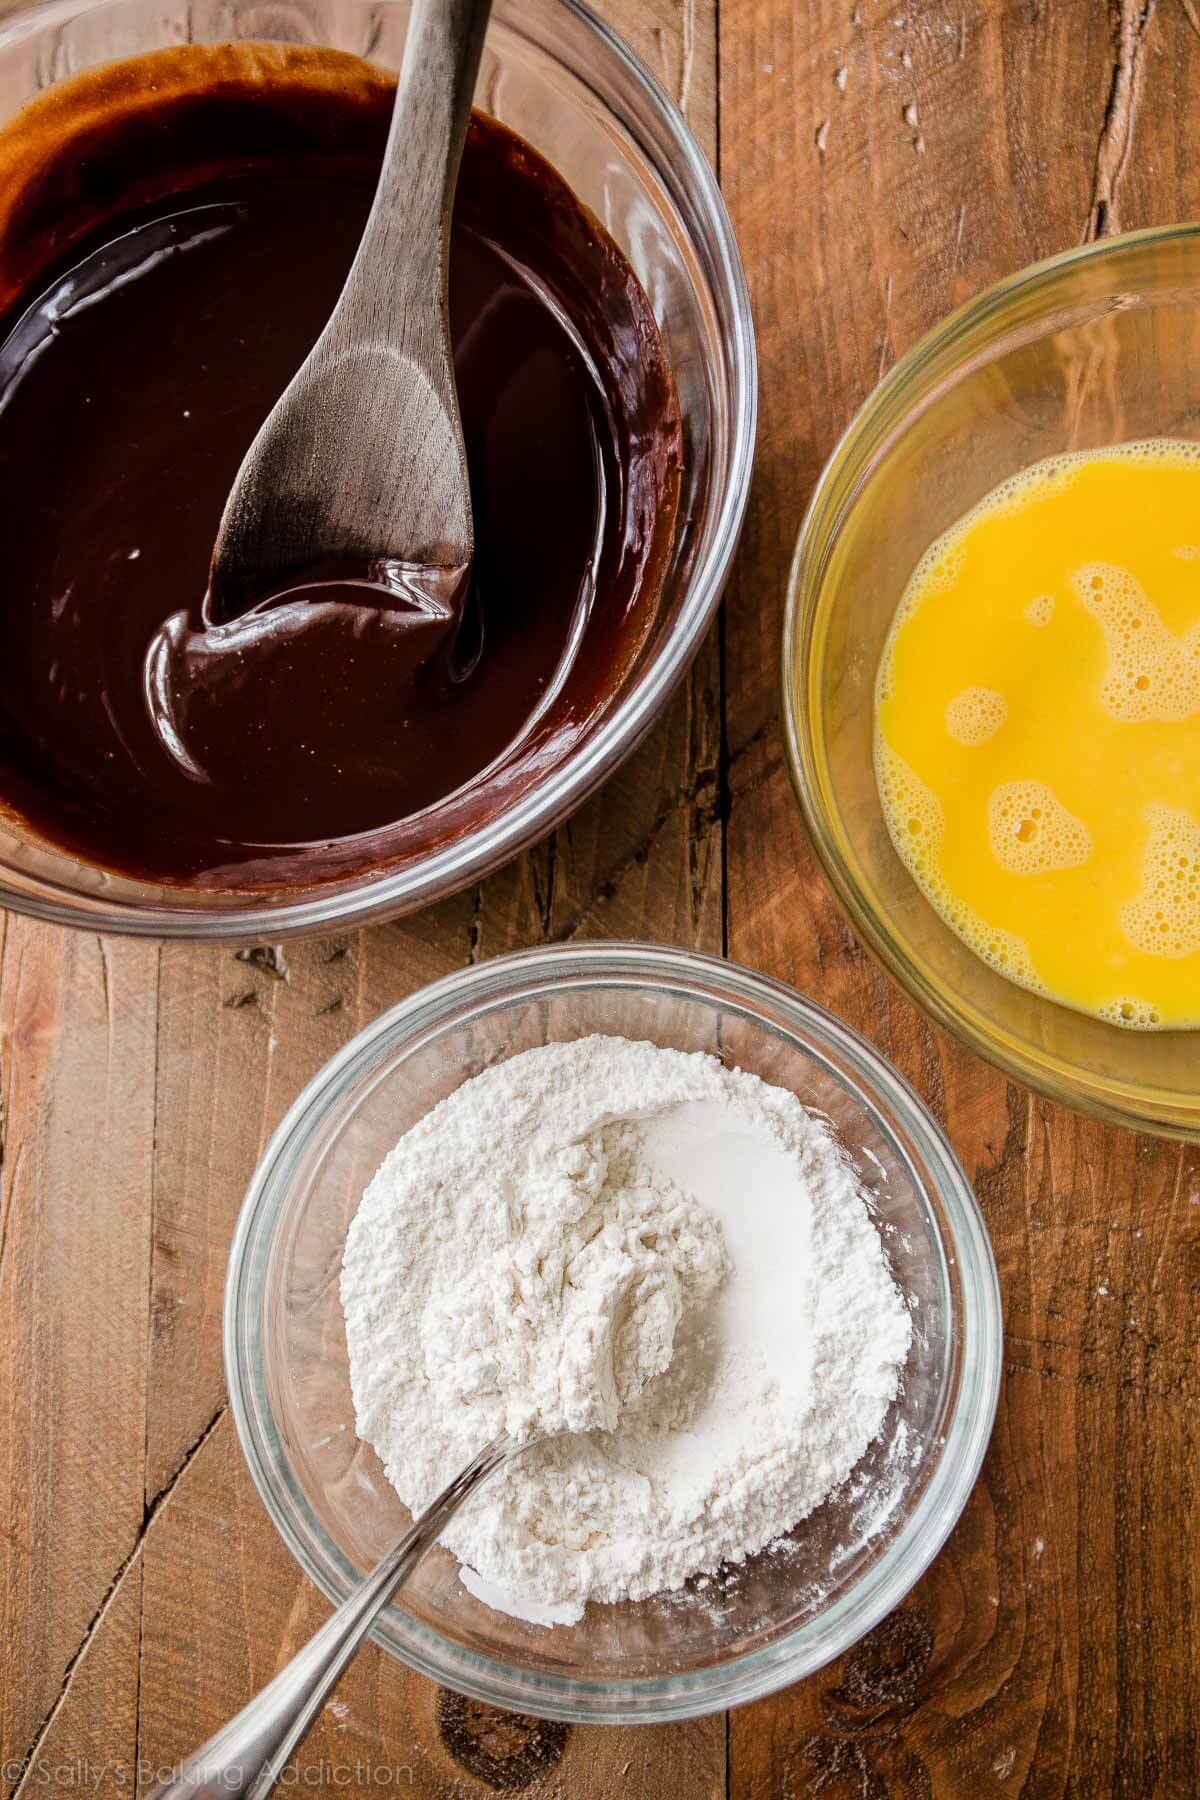 melted chocolate, whisked eggs, and flour mixture in glass bowls